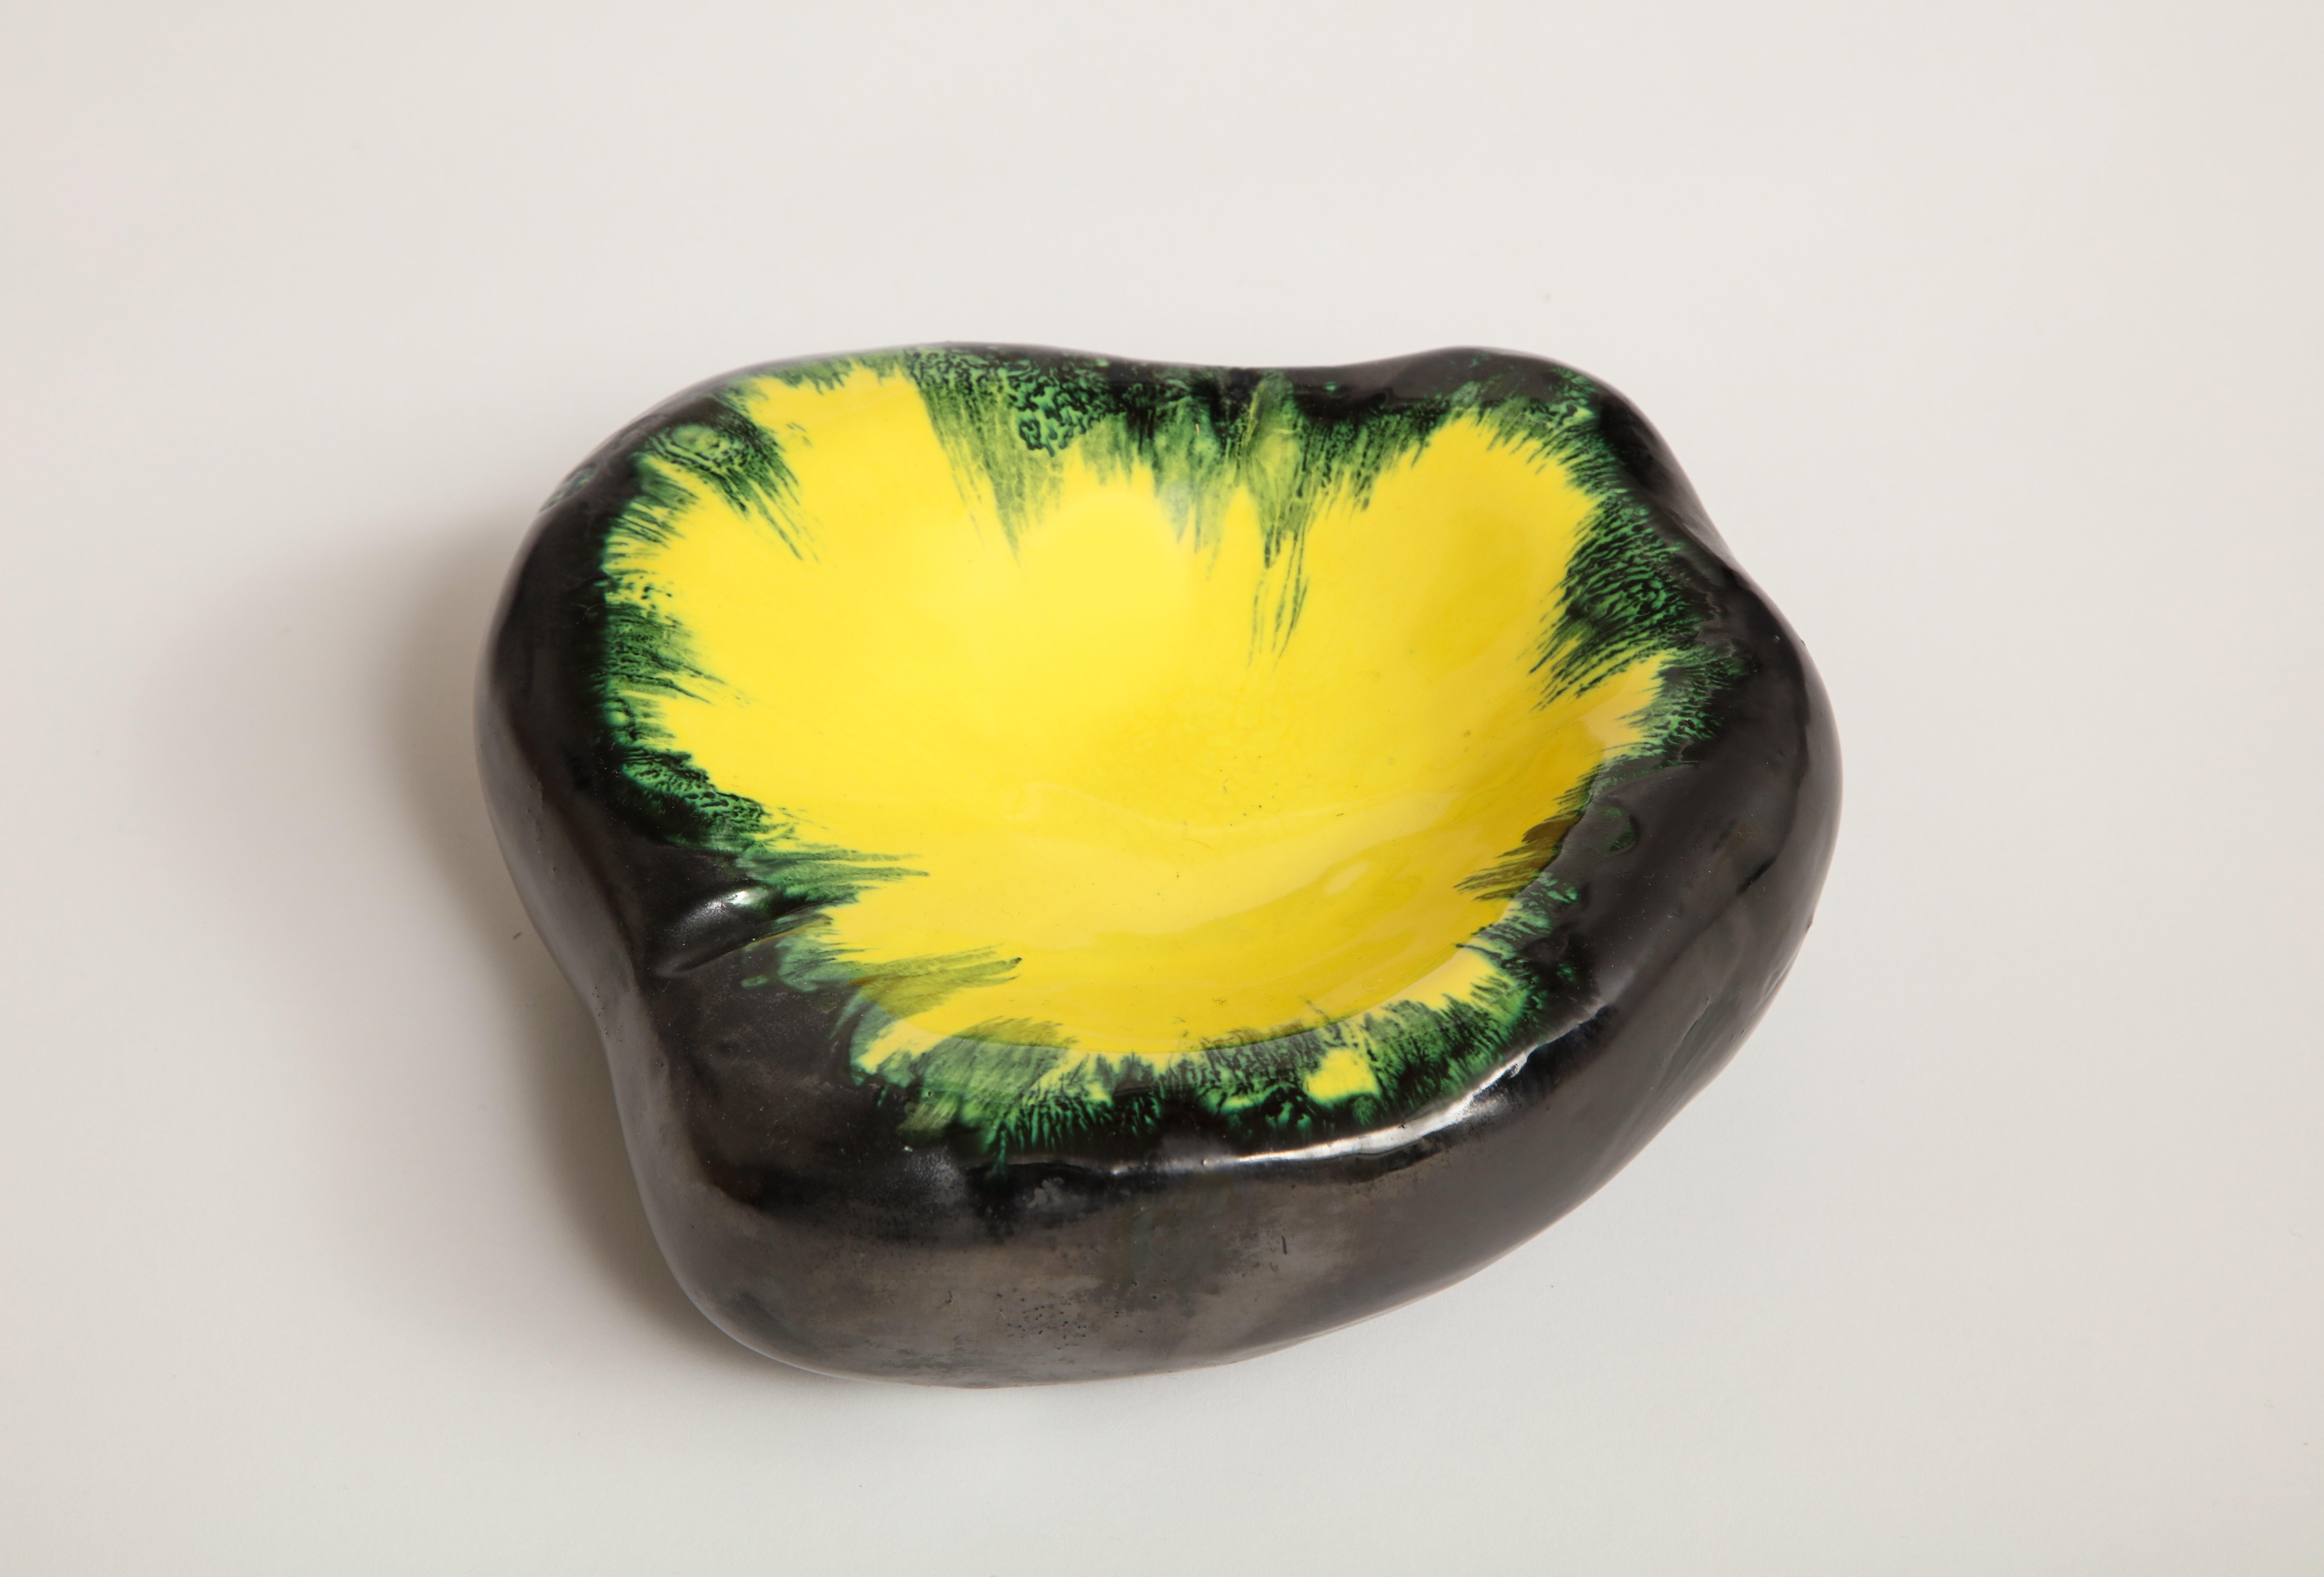 Black, yellow, green ceramic dish in the style of Georges Jouve. Lovely as a catchall or ashtray.